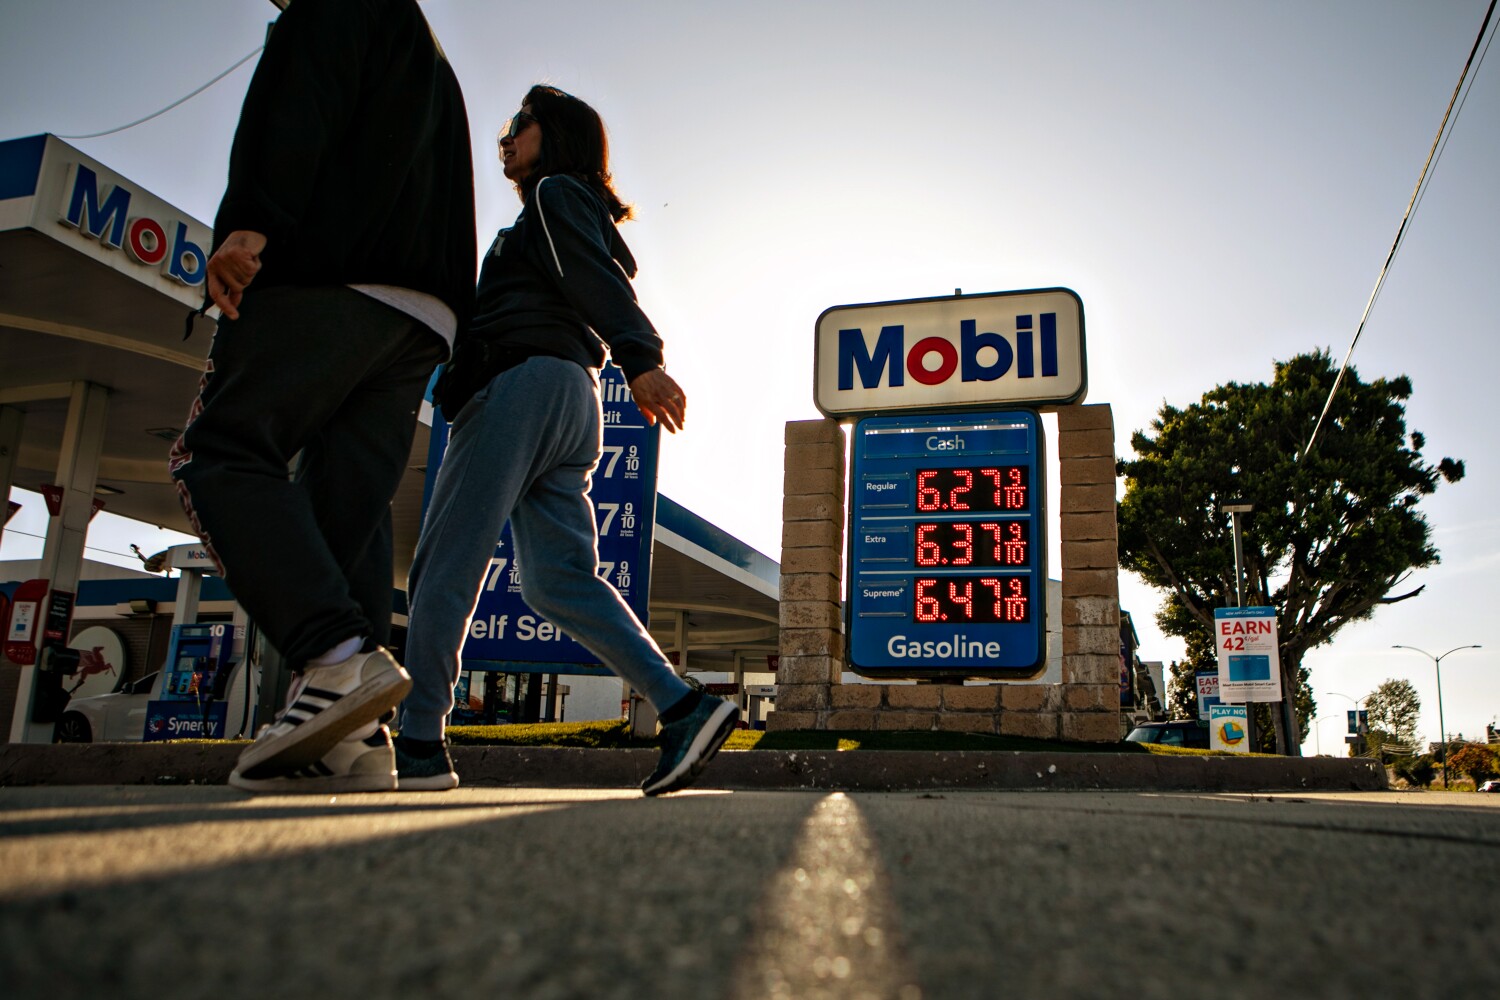 Should both the rich and poor in California receive $400 gas tax rebates?